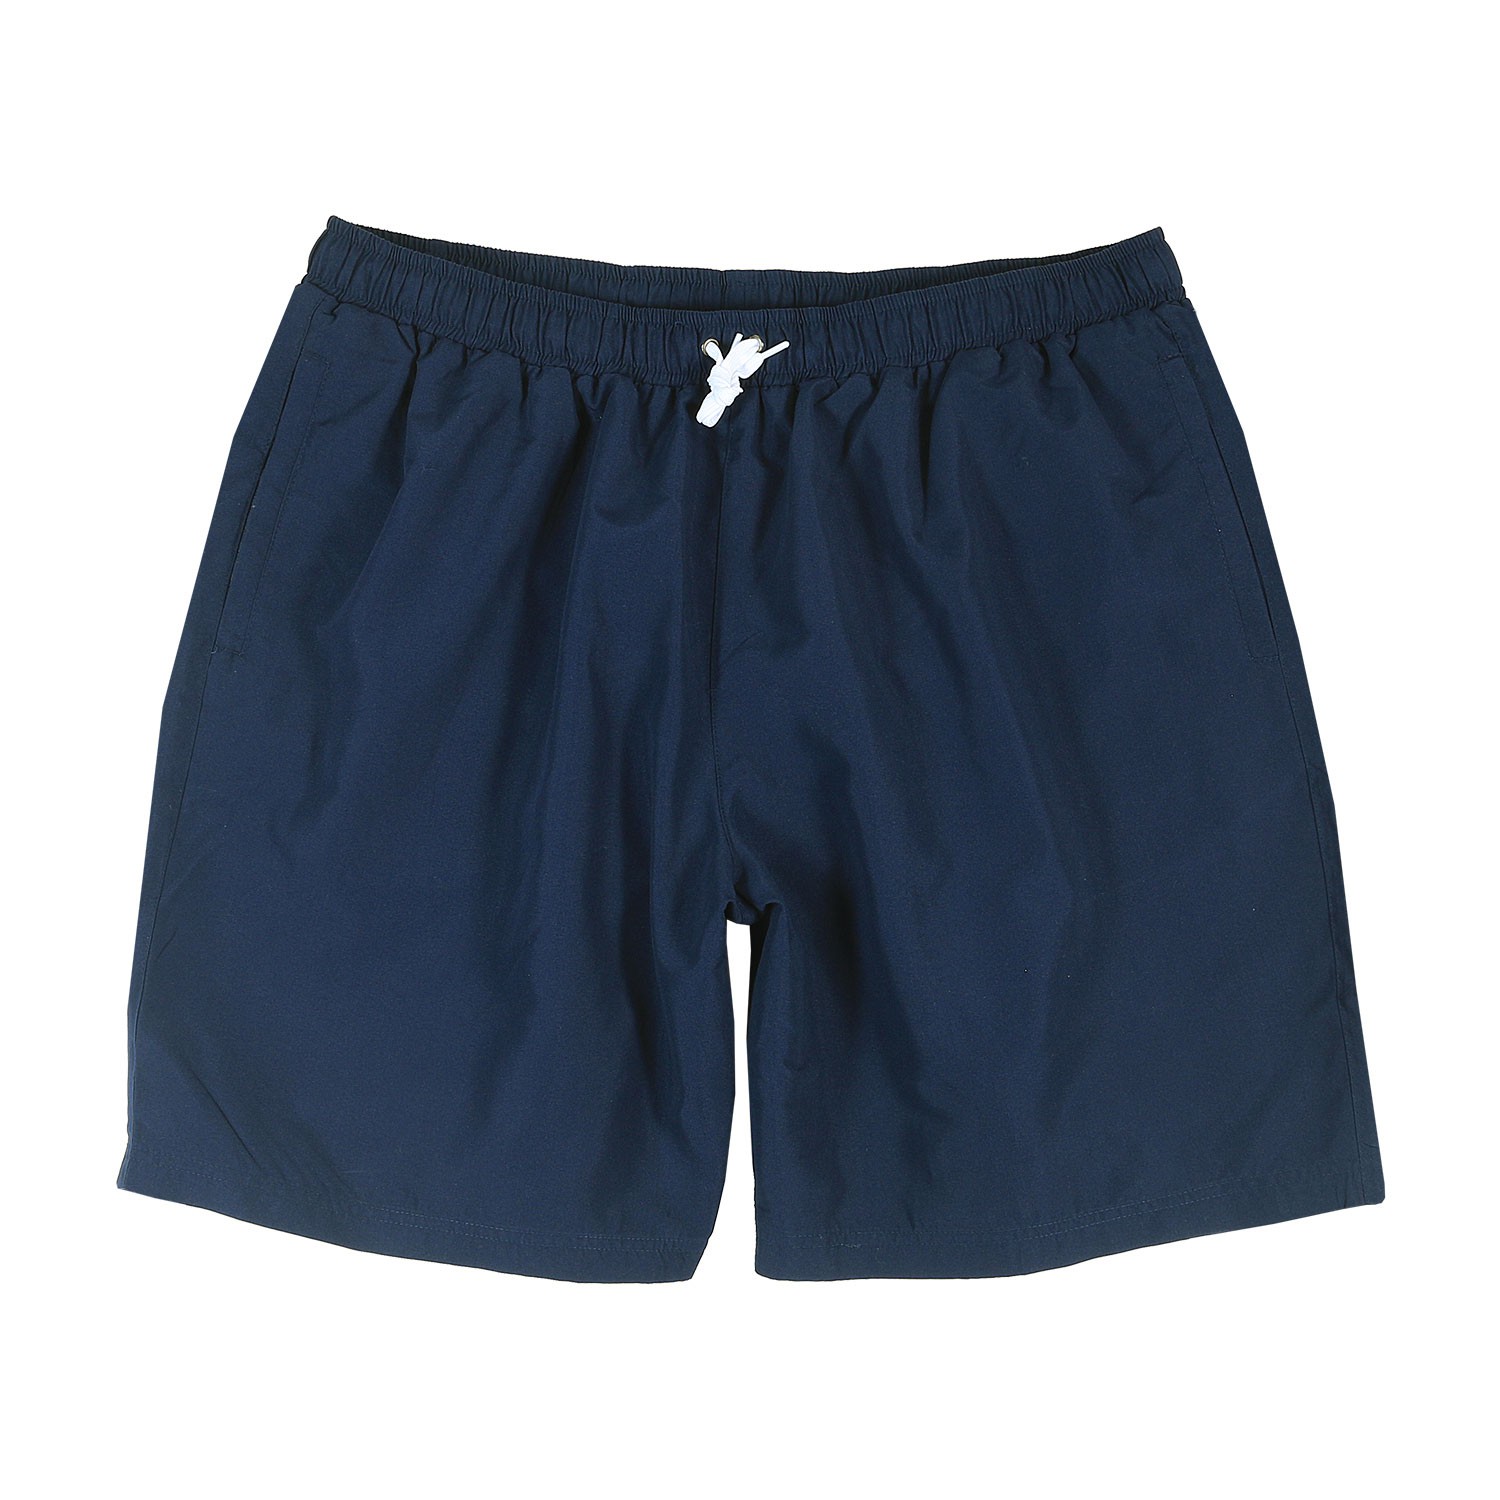 Abraxas swimming trunks in navy up to oversize 10XL